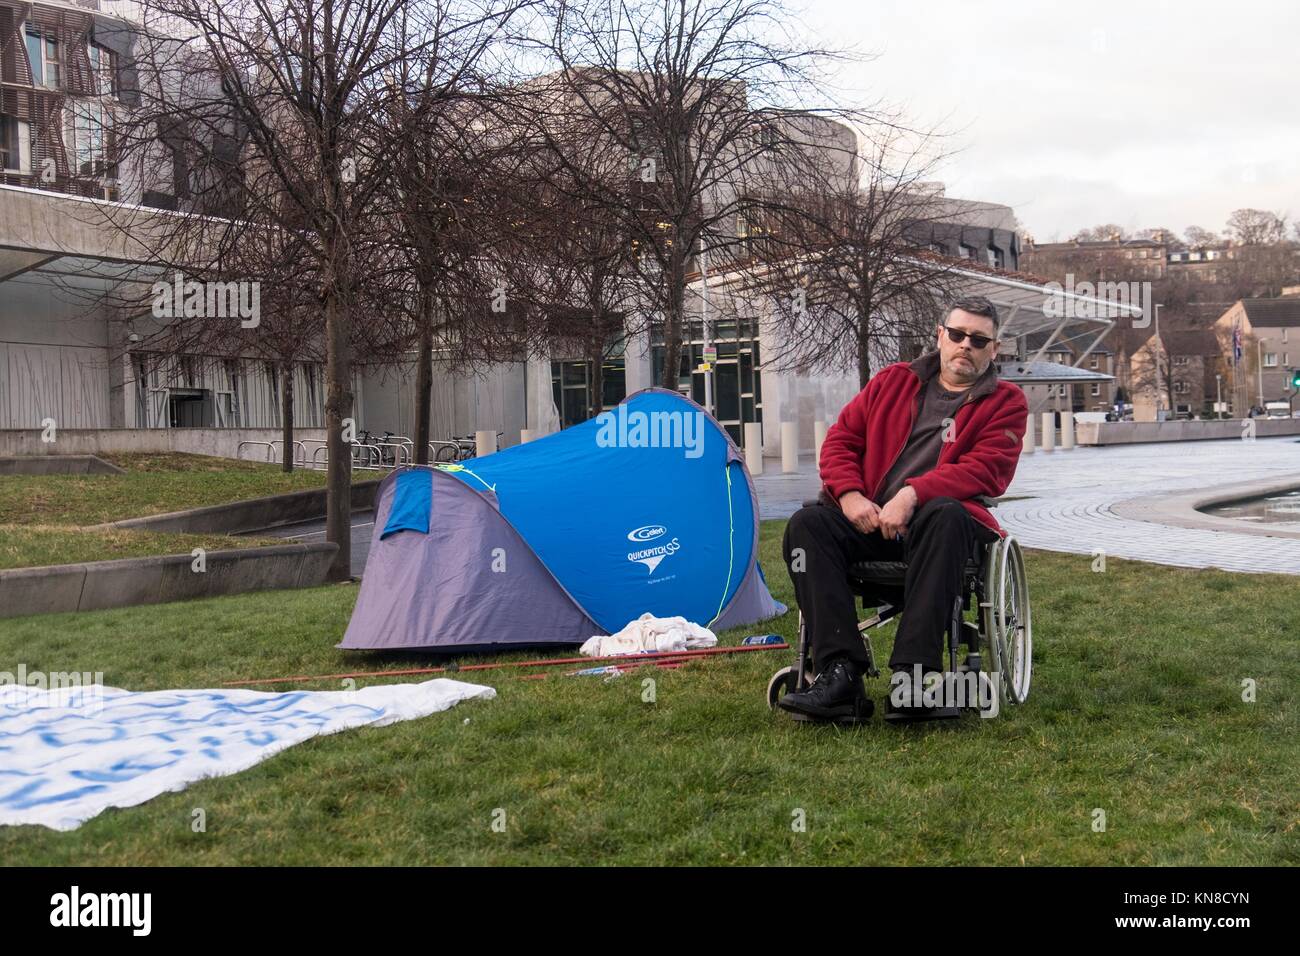 Edinburgh, UK. 11th December, 2017. Campaigner, Ian Morrison from Kilwinning in Ayrshire has set up a tent in the grounds of the Scottish Parliament and has threatened to carry out a hunger strike until he is allowed to meet with SNP Health Minister, Shona Robison.  Morrison's campaign relates to the use of opioids in treatment in the Scottish NHS where drug related general acute stays have increased from 41 people to 143 people per 100k between 1996 and 2016. Credit: Rich Dyson/Alamy Live News Stock Photo